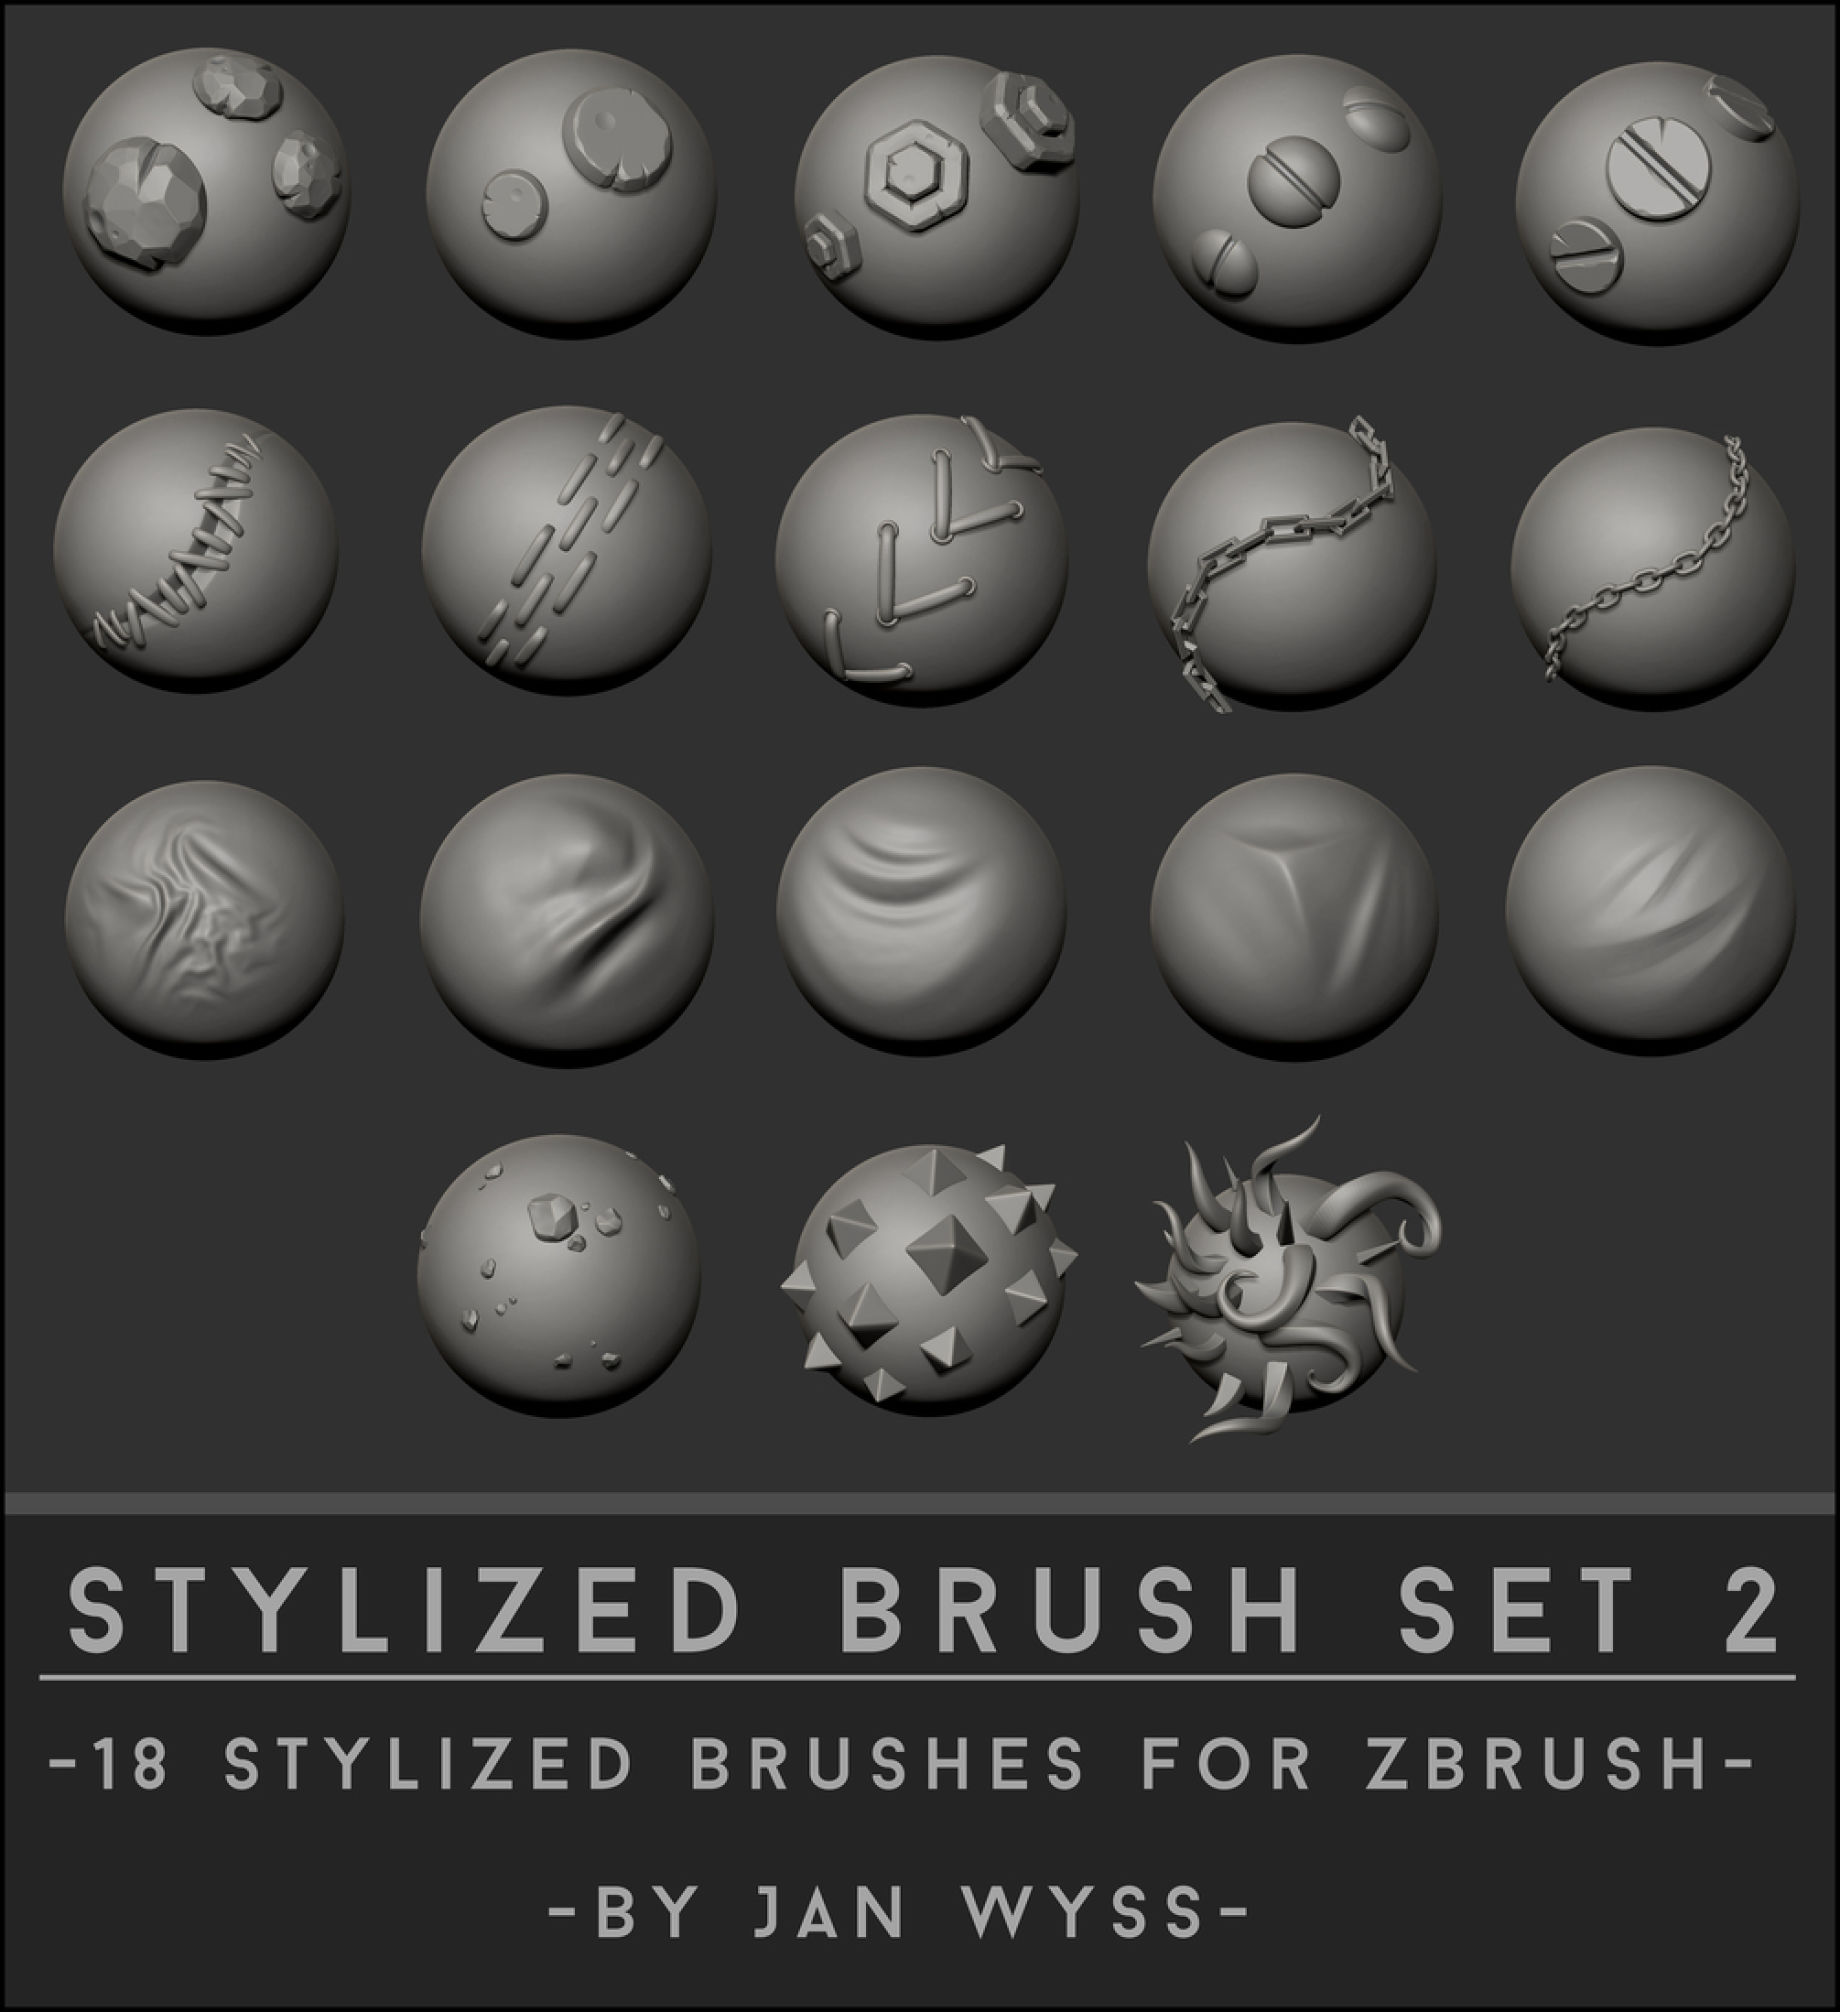 upgrade zbrush 4r7 to 4r8